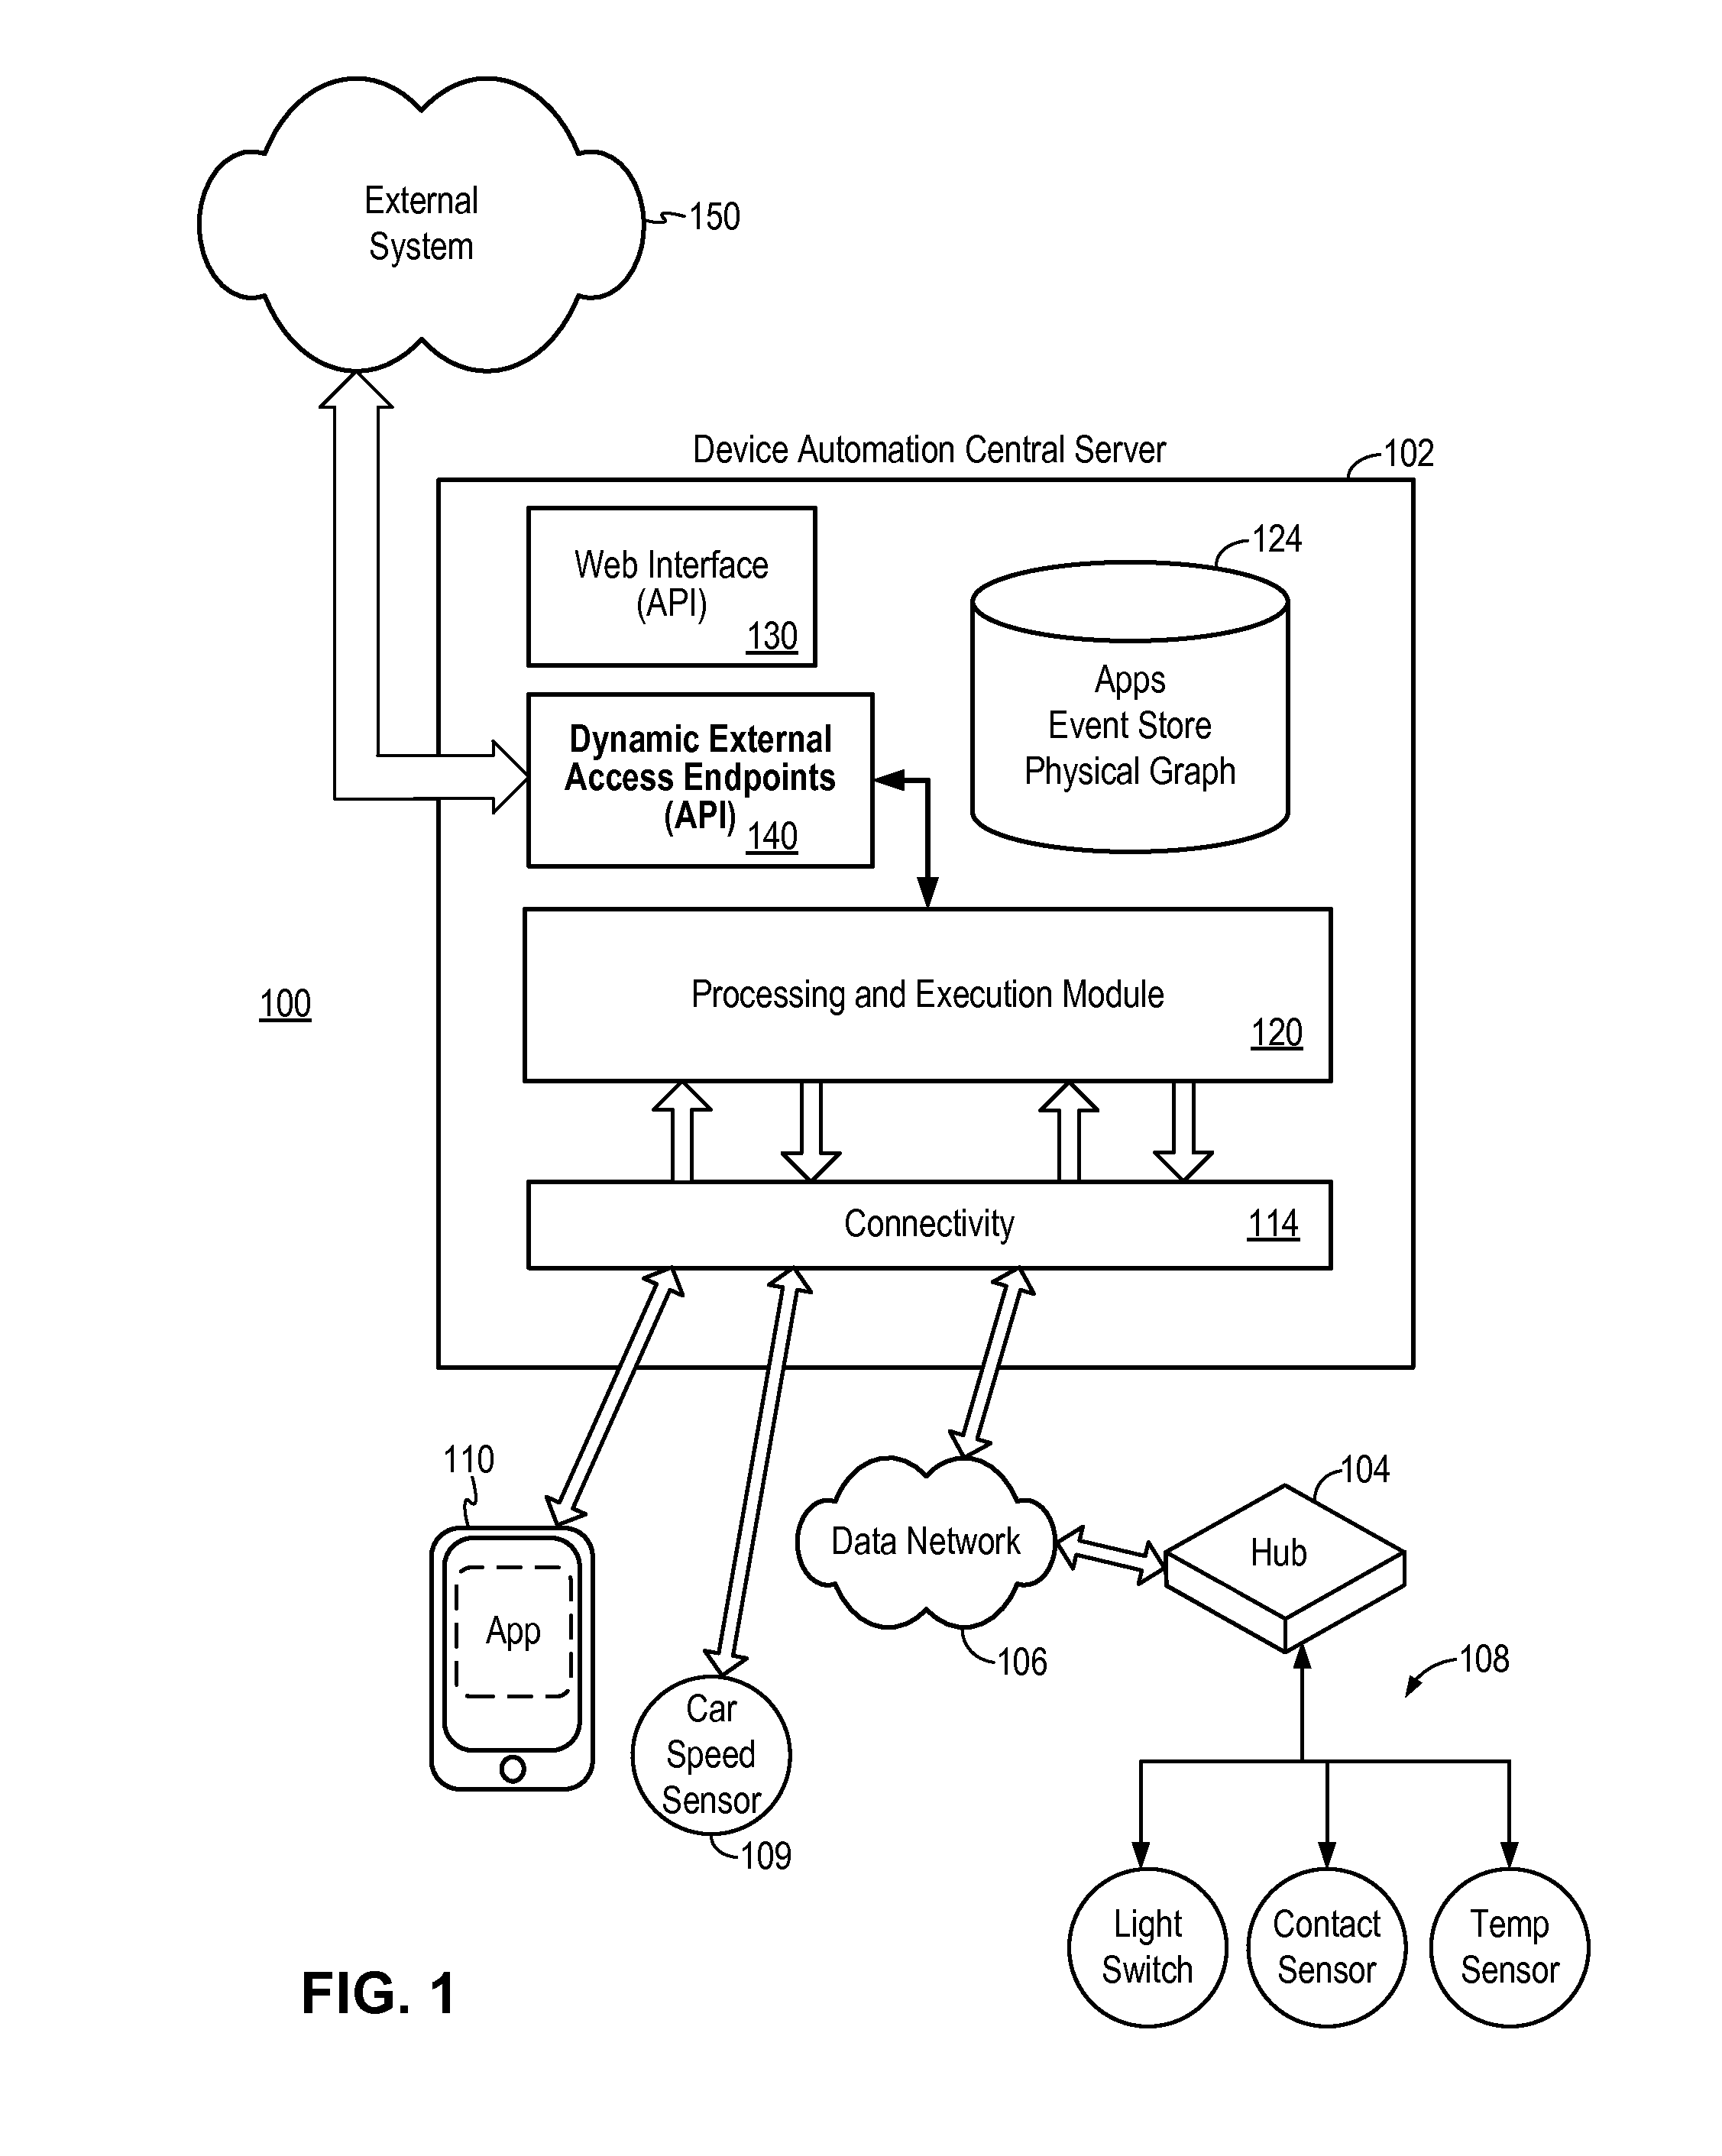 Secure external access to device automation system